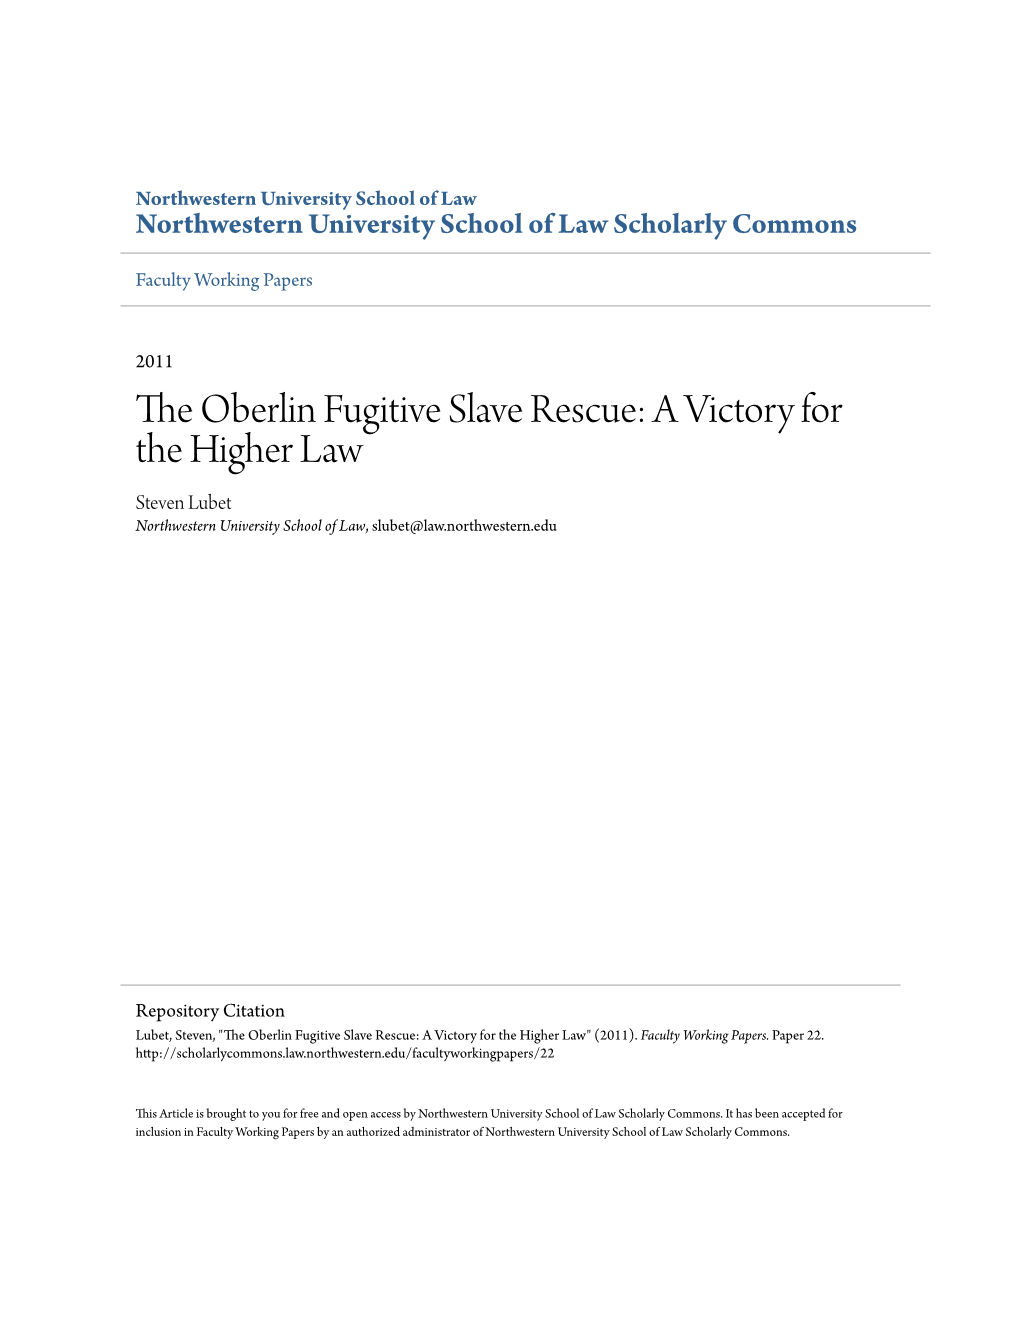 The Oberlin Fugitive Slave Rescue: a Victory for the Higher Law Steven Lubet Northwestern University School of Law, Slubet@Law.Northwestern.Edu